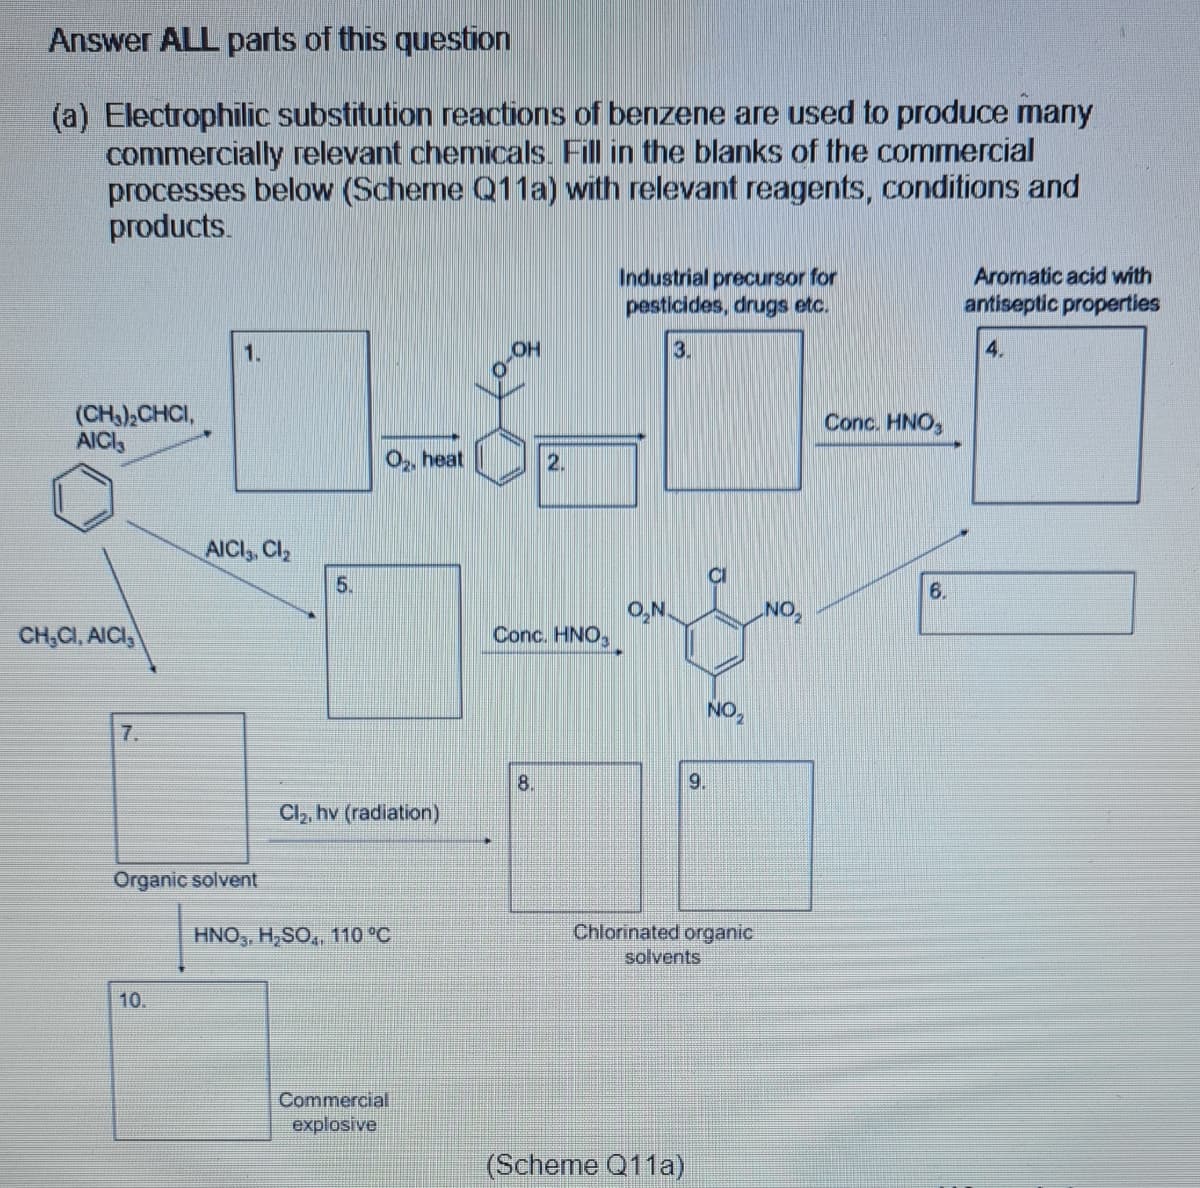 Answer ALL parts of this question
(a) Electrophilic substitution reactions of benzene are used to produce many
commercially relevant chemicals. Fill in the blanks of the commercial
processes below (Scherme Q11a) with relevant reagents, conditions and
products.
Industrial precursor for
pesticides, drugs etc.
Aromatic acid with
antiseptic properties
1.
3.
4.
(CH),CHCI,
AICI3
Conc. HNO,
O, heat
2.
AICI,, Cl2
5.
6.
O,N.
Conc. HNO,
NO,
CH,CI, AICI,
NO,
7.
8.
9.
Cl, hv (radiation)
Organic solvent
HNO,, H, SO, 110 °C
Chlorinated organic
solvents
10.
Commercial
explosive
(Scheme Q11a)
